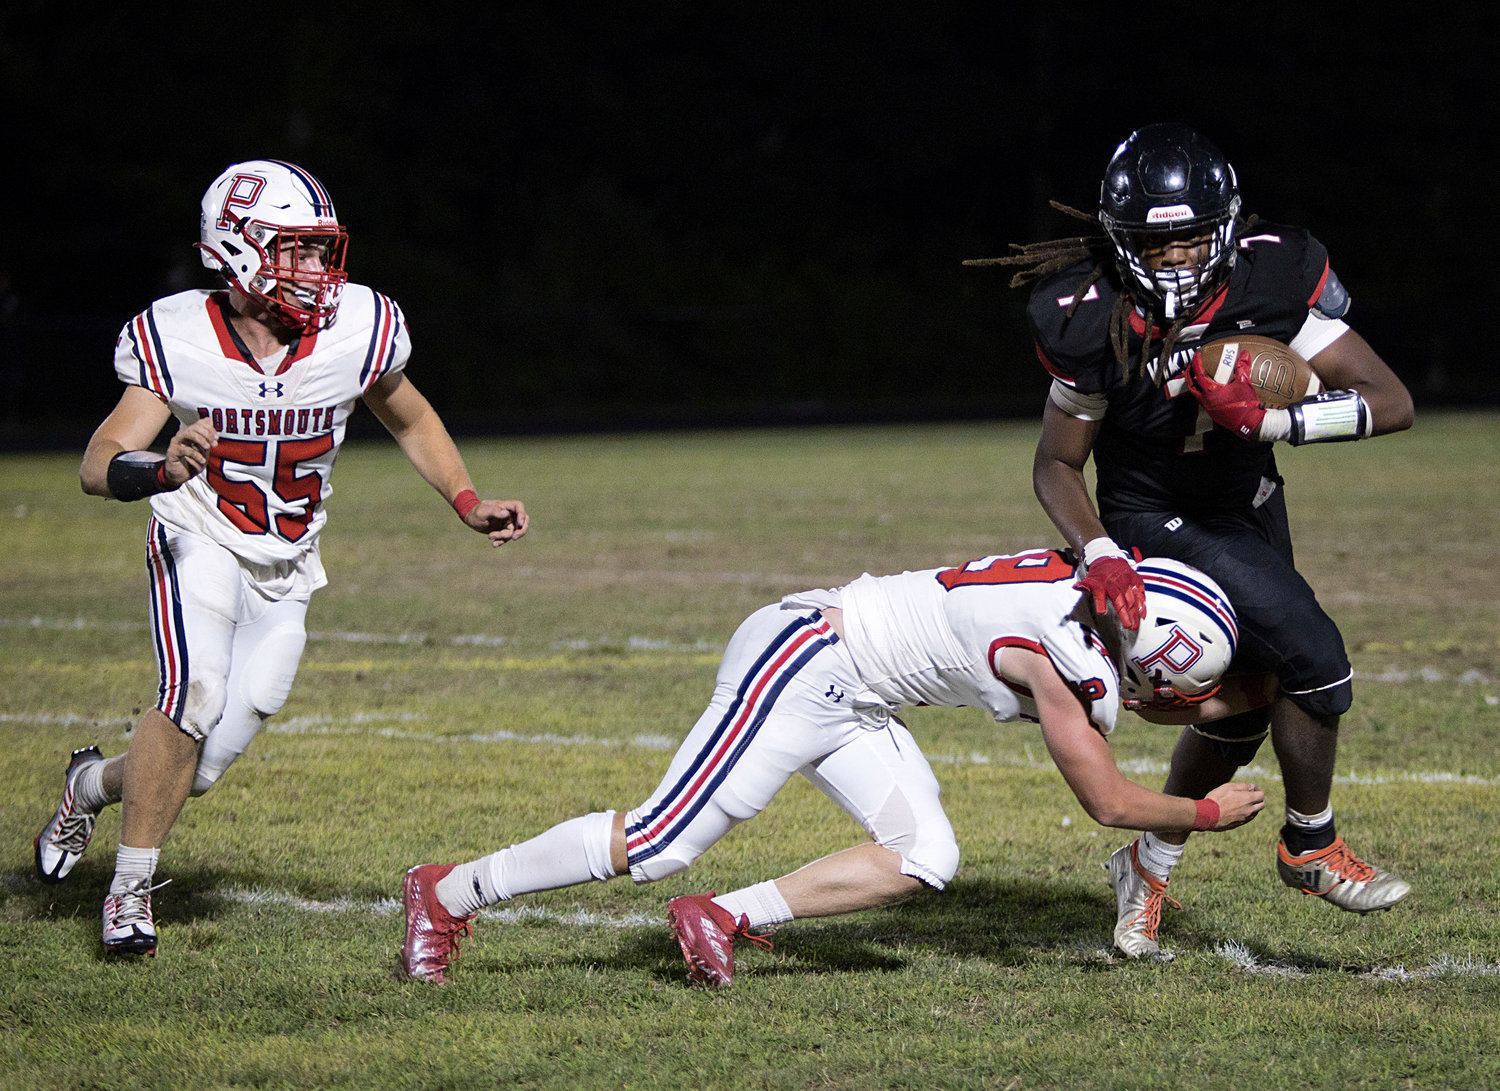 Luke Brennan dives into a Rogers opponent while playing defense for the Patriots.